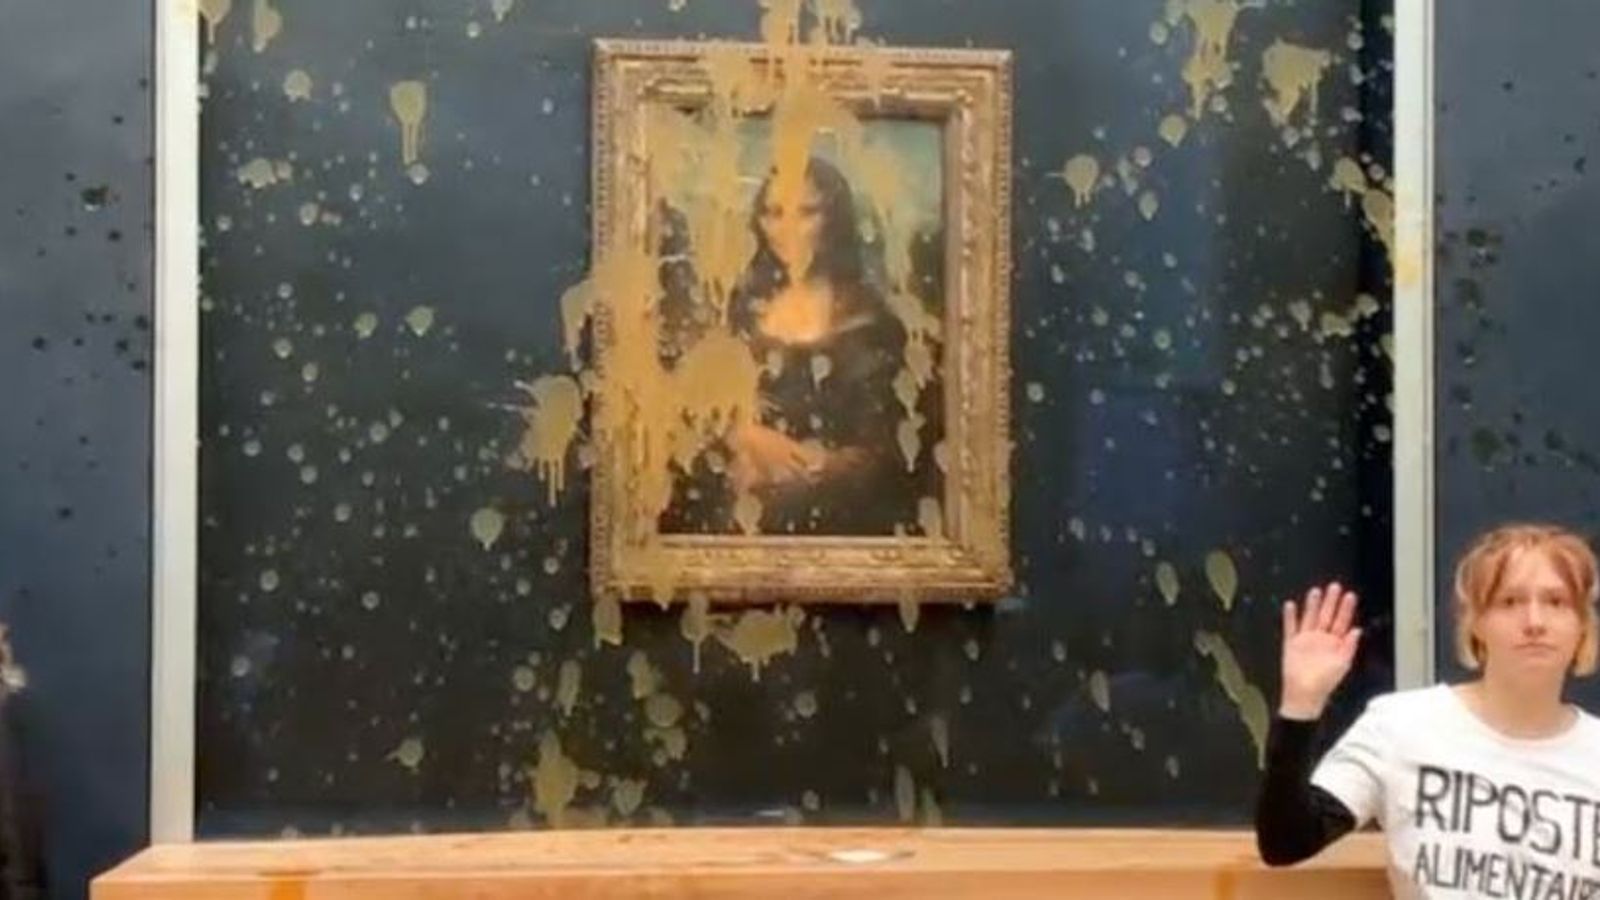 Protesters Throw Soup at Mona Lisa Painting in Louvre to Demand Healthy and Sustainable Food